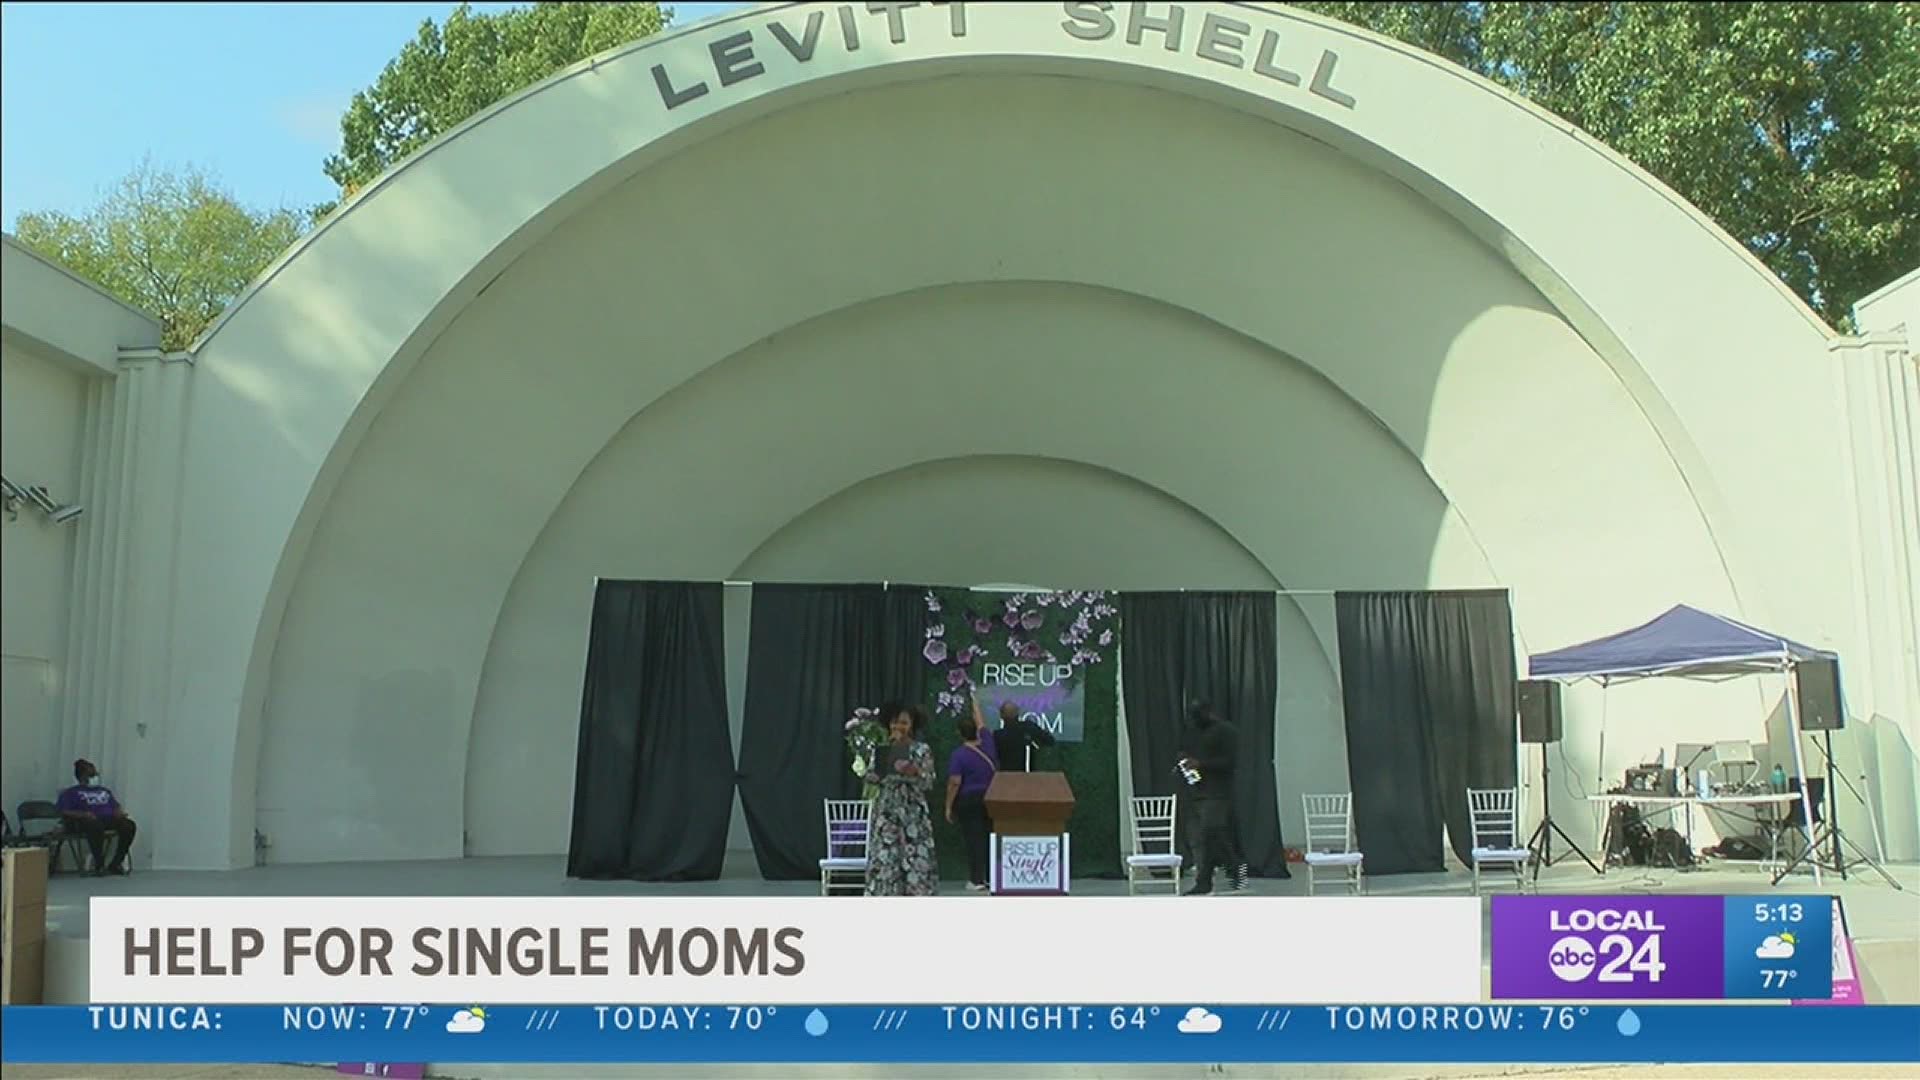 local mom shows up her love and appreciation for single mom in annual event in midtown memphis.